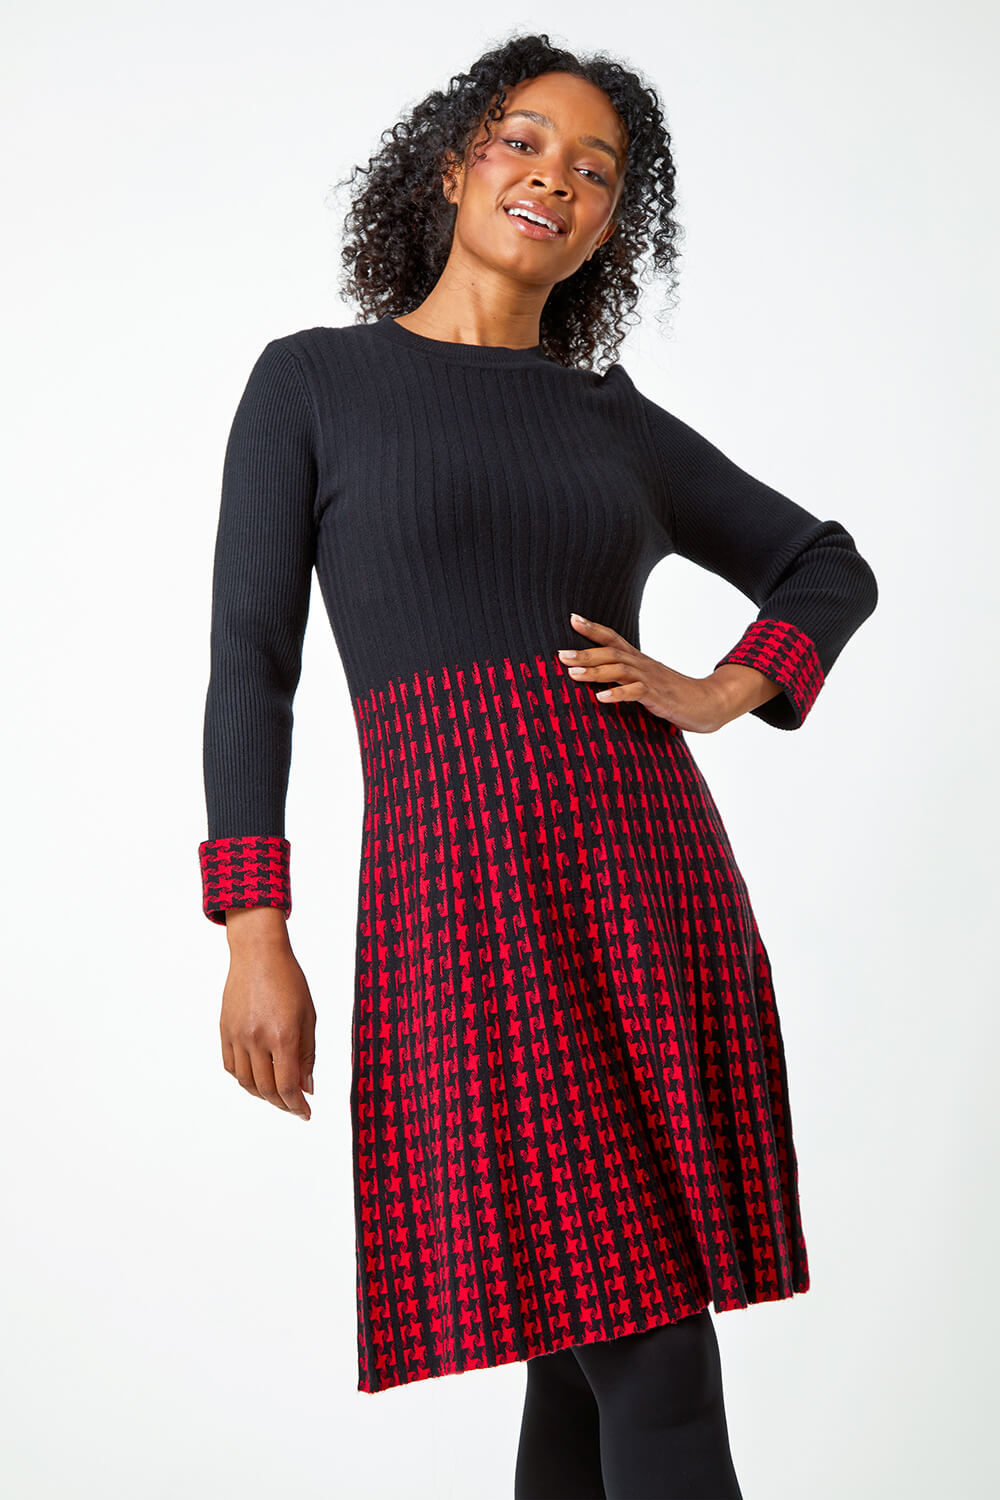 Red Petite Contrast Knit Jumper Dress, Image 2 of 5